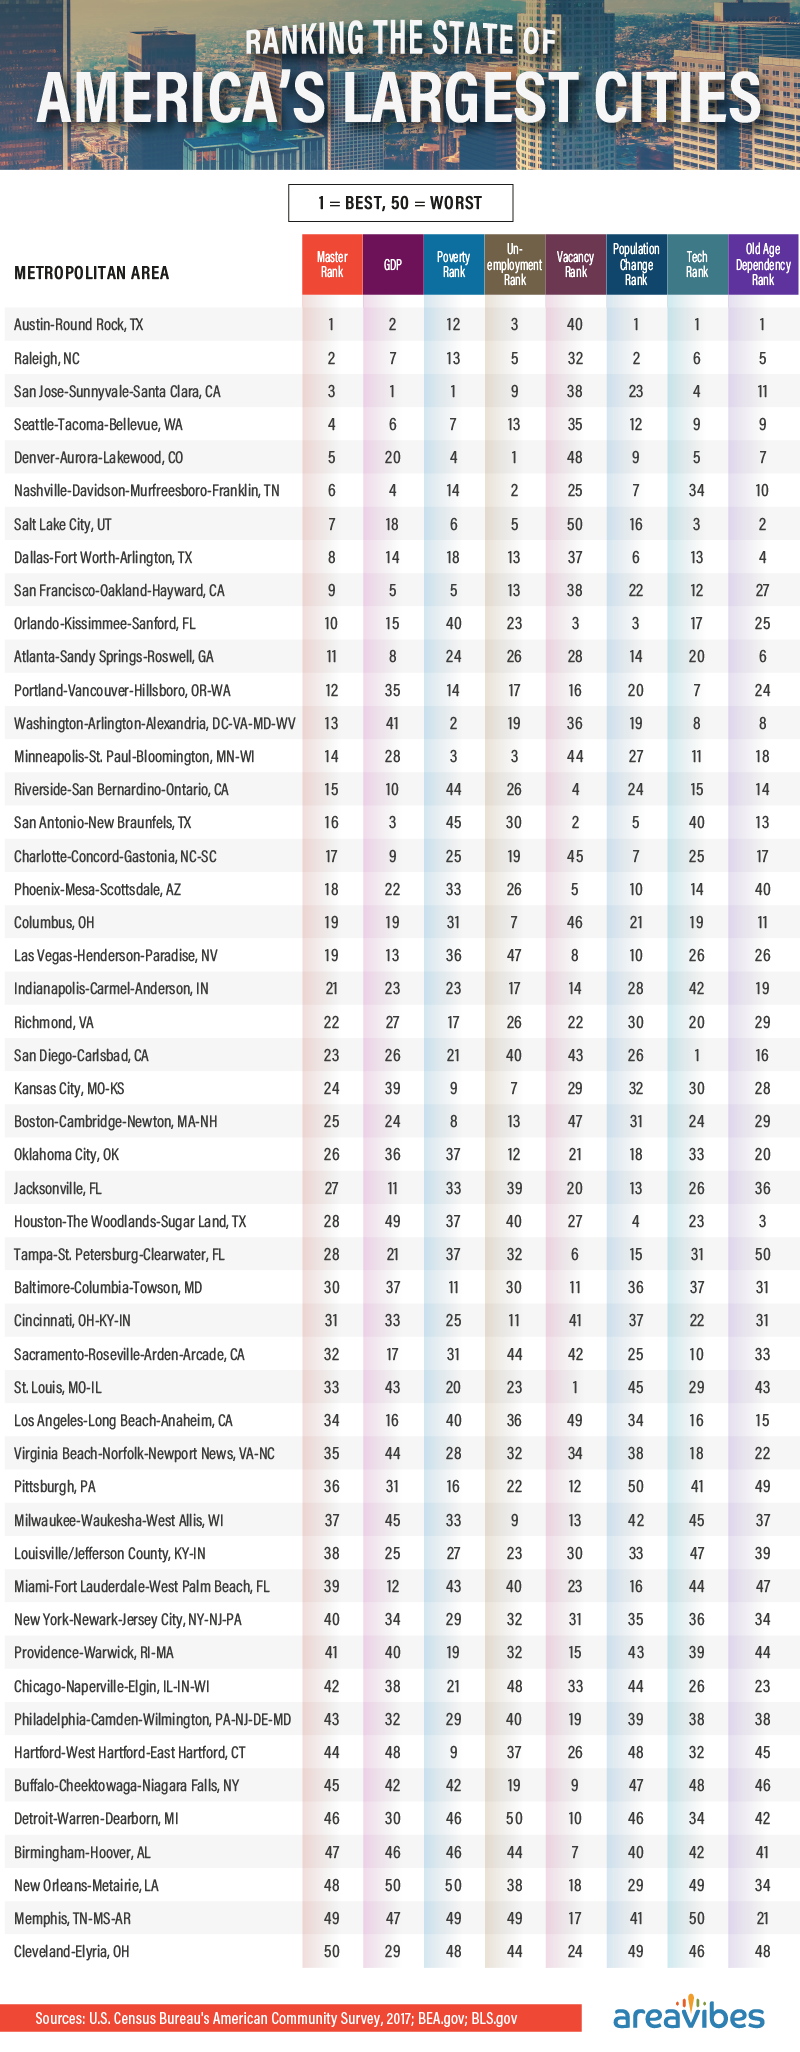 Ranking and Growth of America's 50 Largest Cities